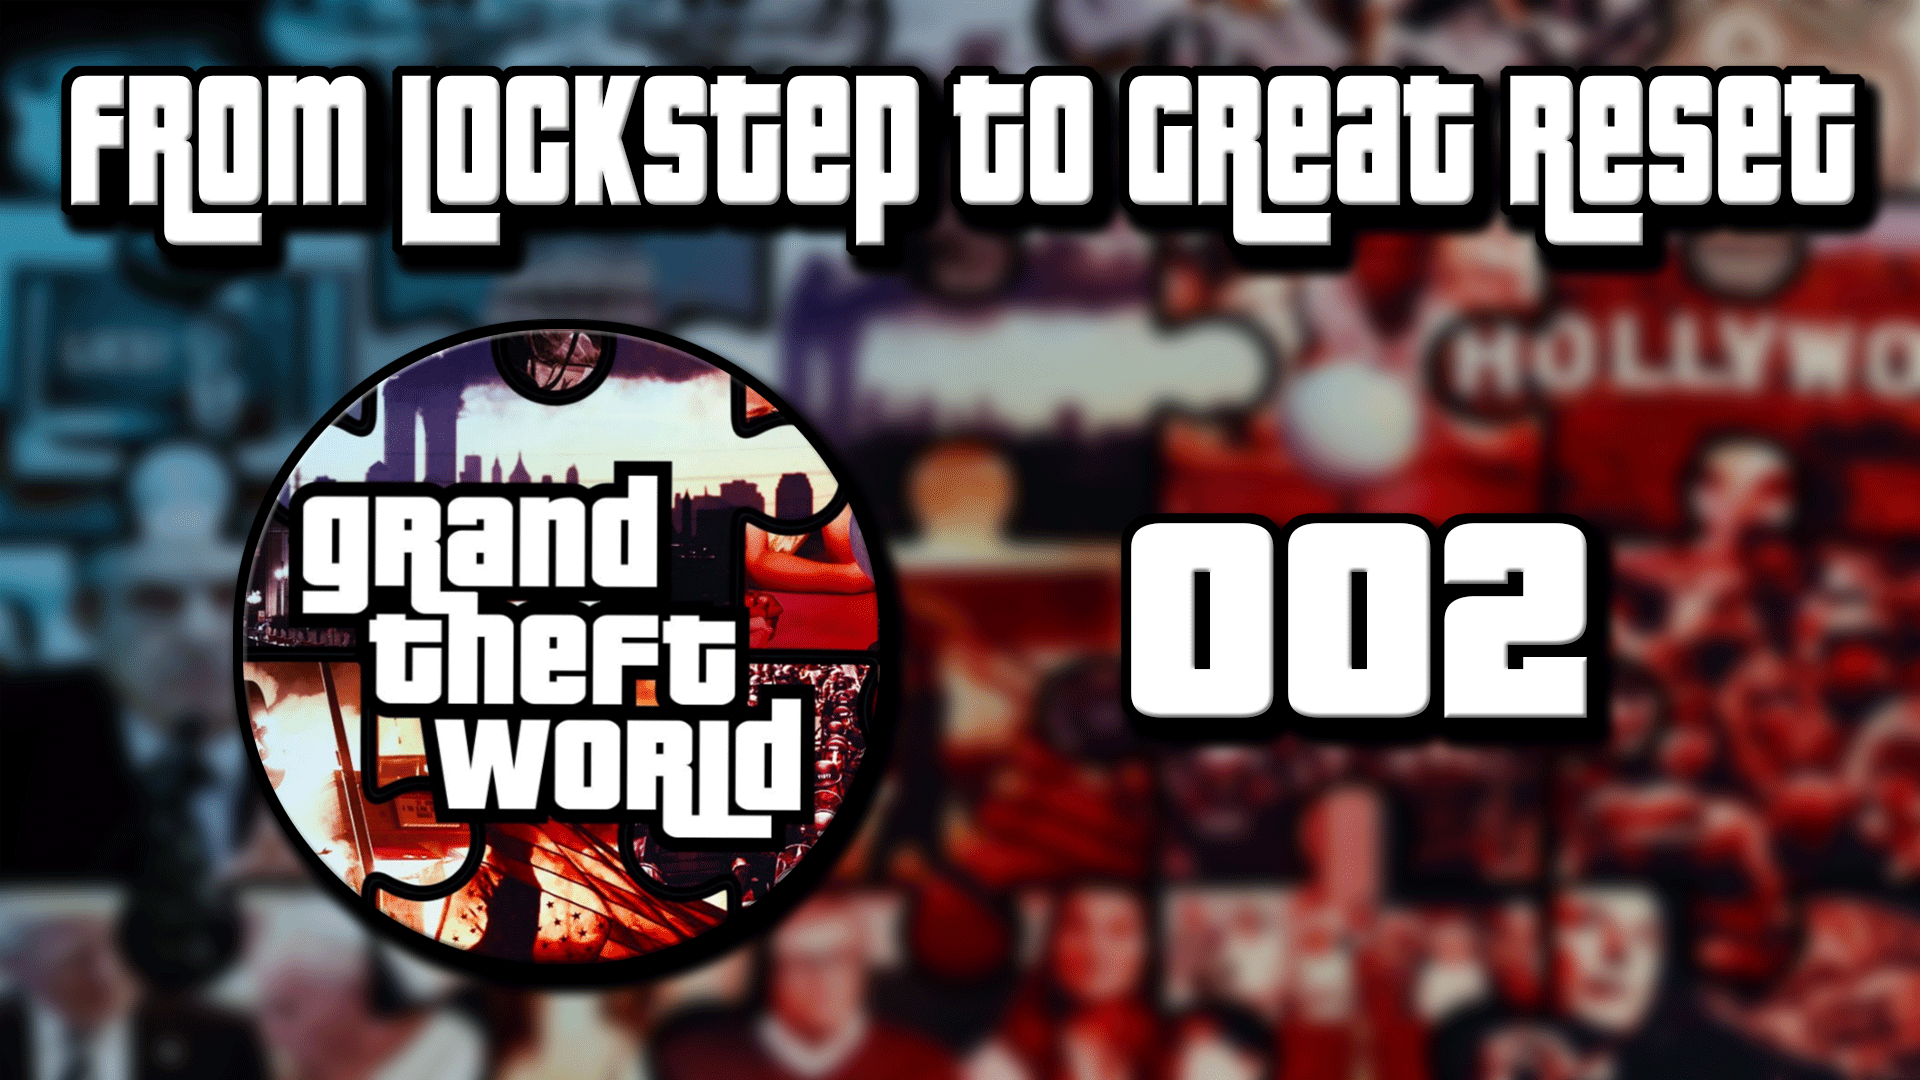 Grand Theft World Podcast 002 | From Lockstep to Great Reset